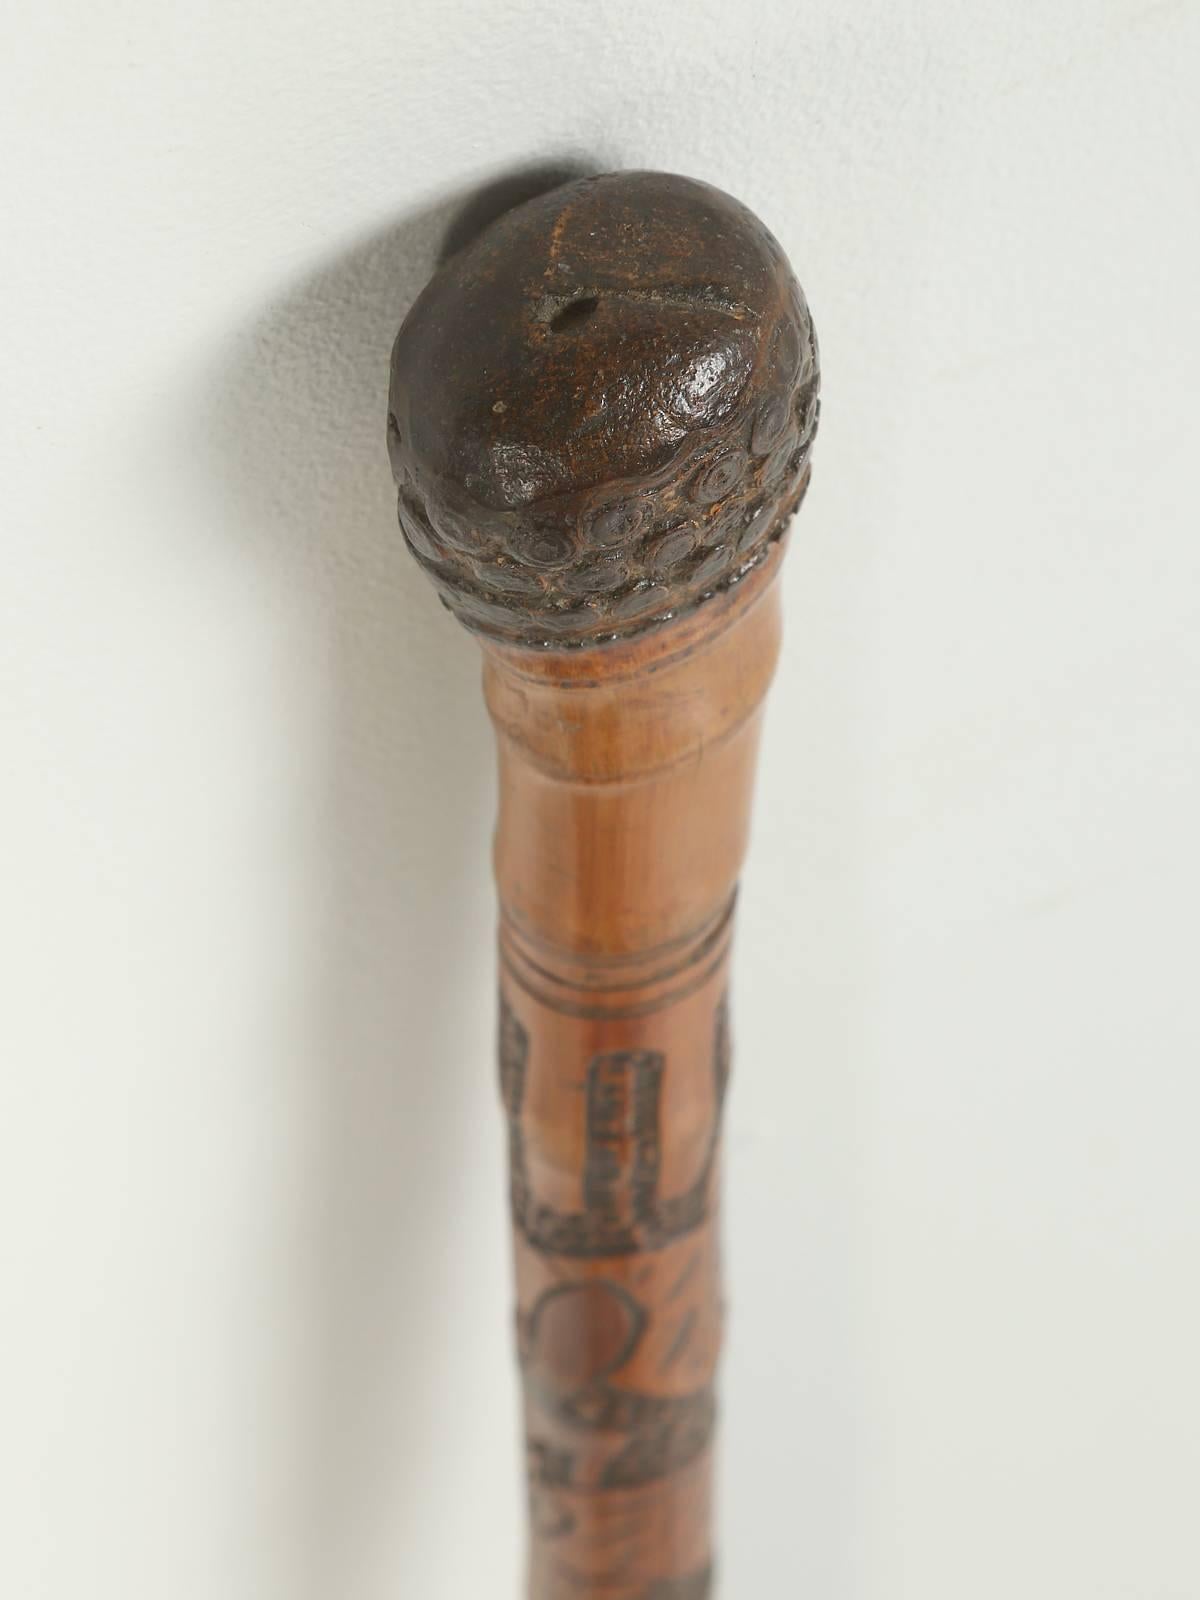 Antique bamboo walking stick, or cane imported from France, that has a large hidden Sword built into the interior of the bamboo. The knob at the top appears to be part of the bamboo itself and there is a large steel ferrule at the bottom. The